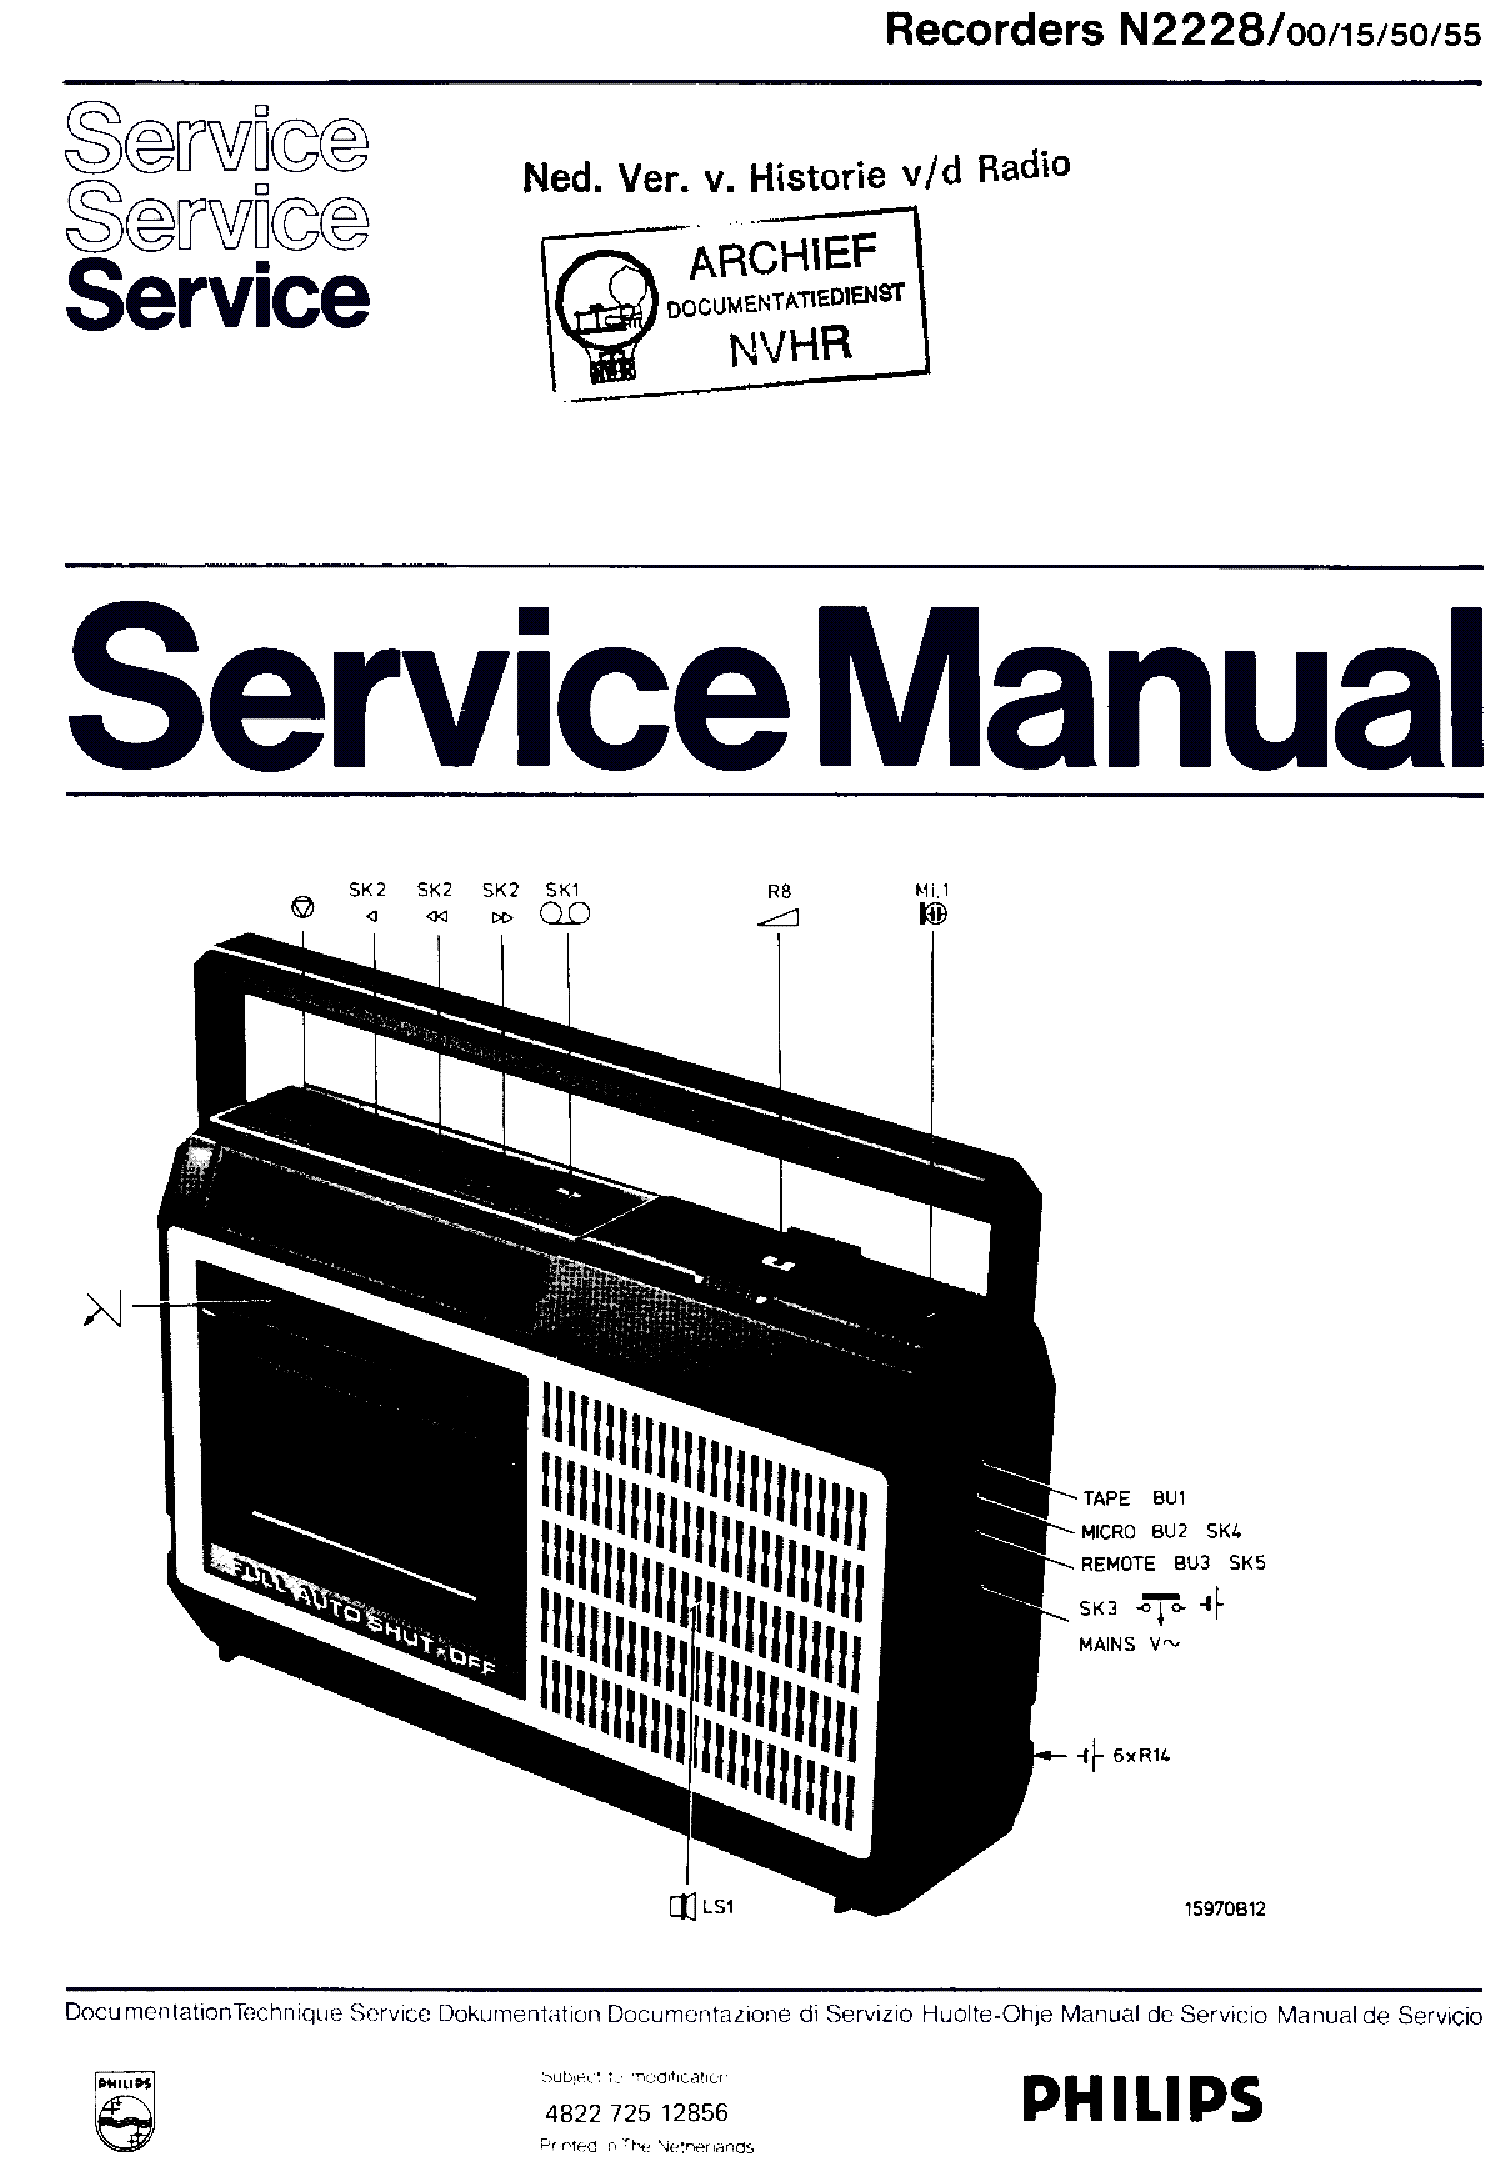 PHILIPS N2228-00-15-50-55 CASSETTE RECORDER SM service manual (1st page)